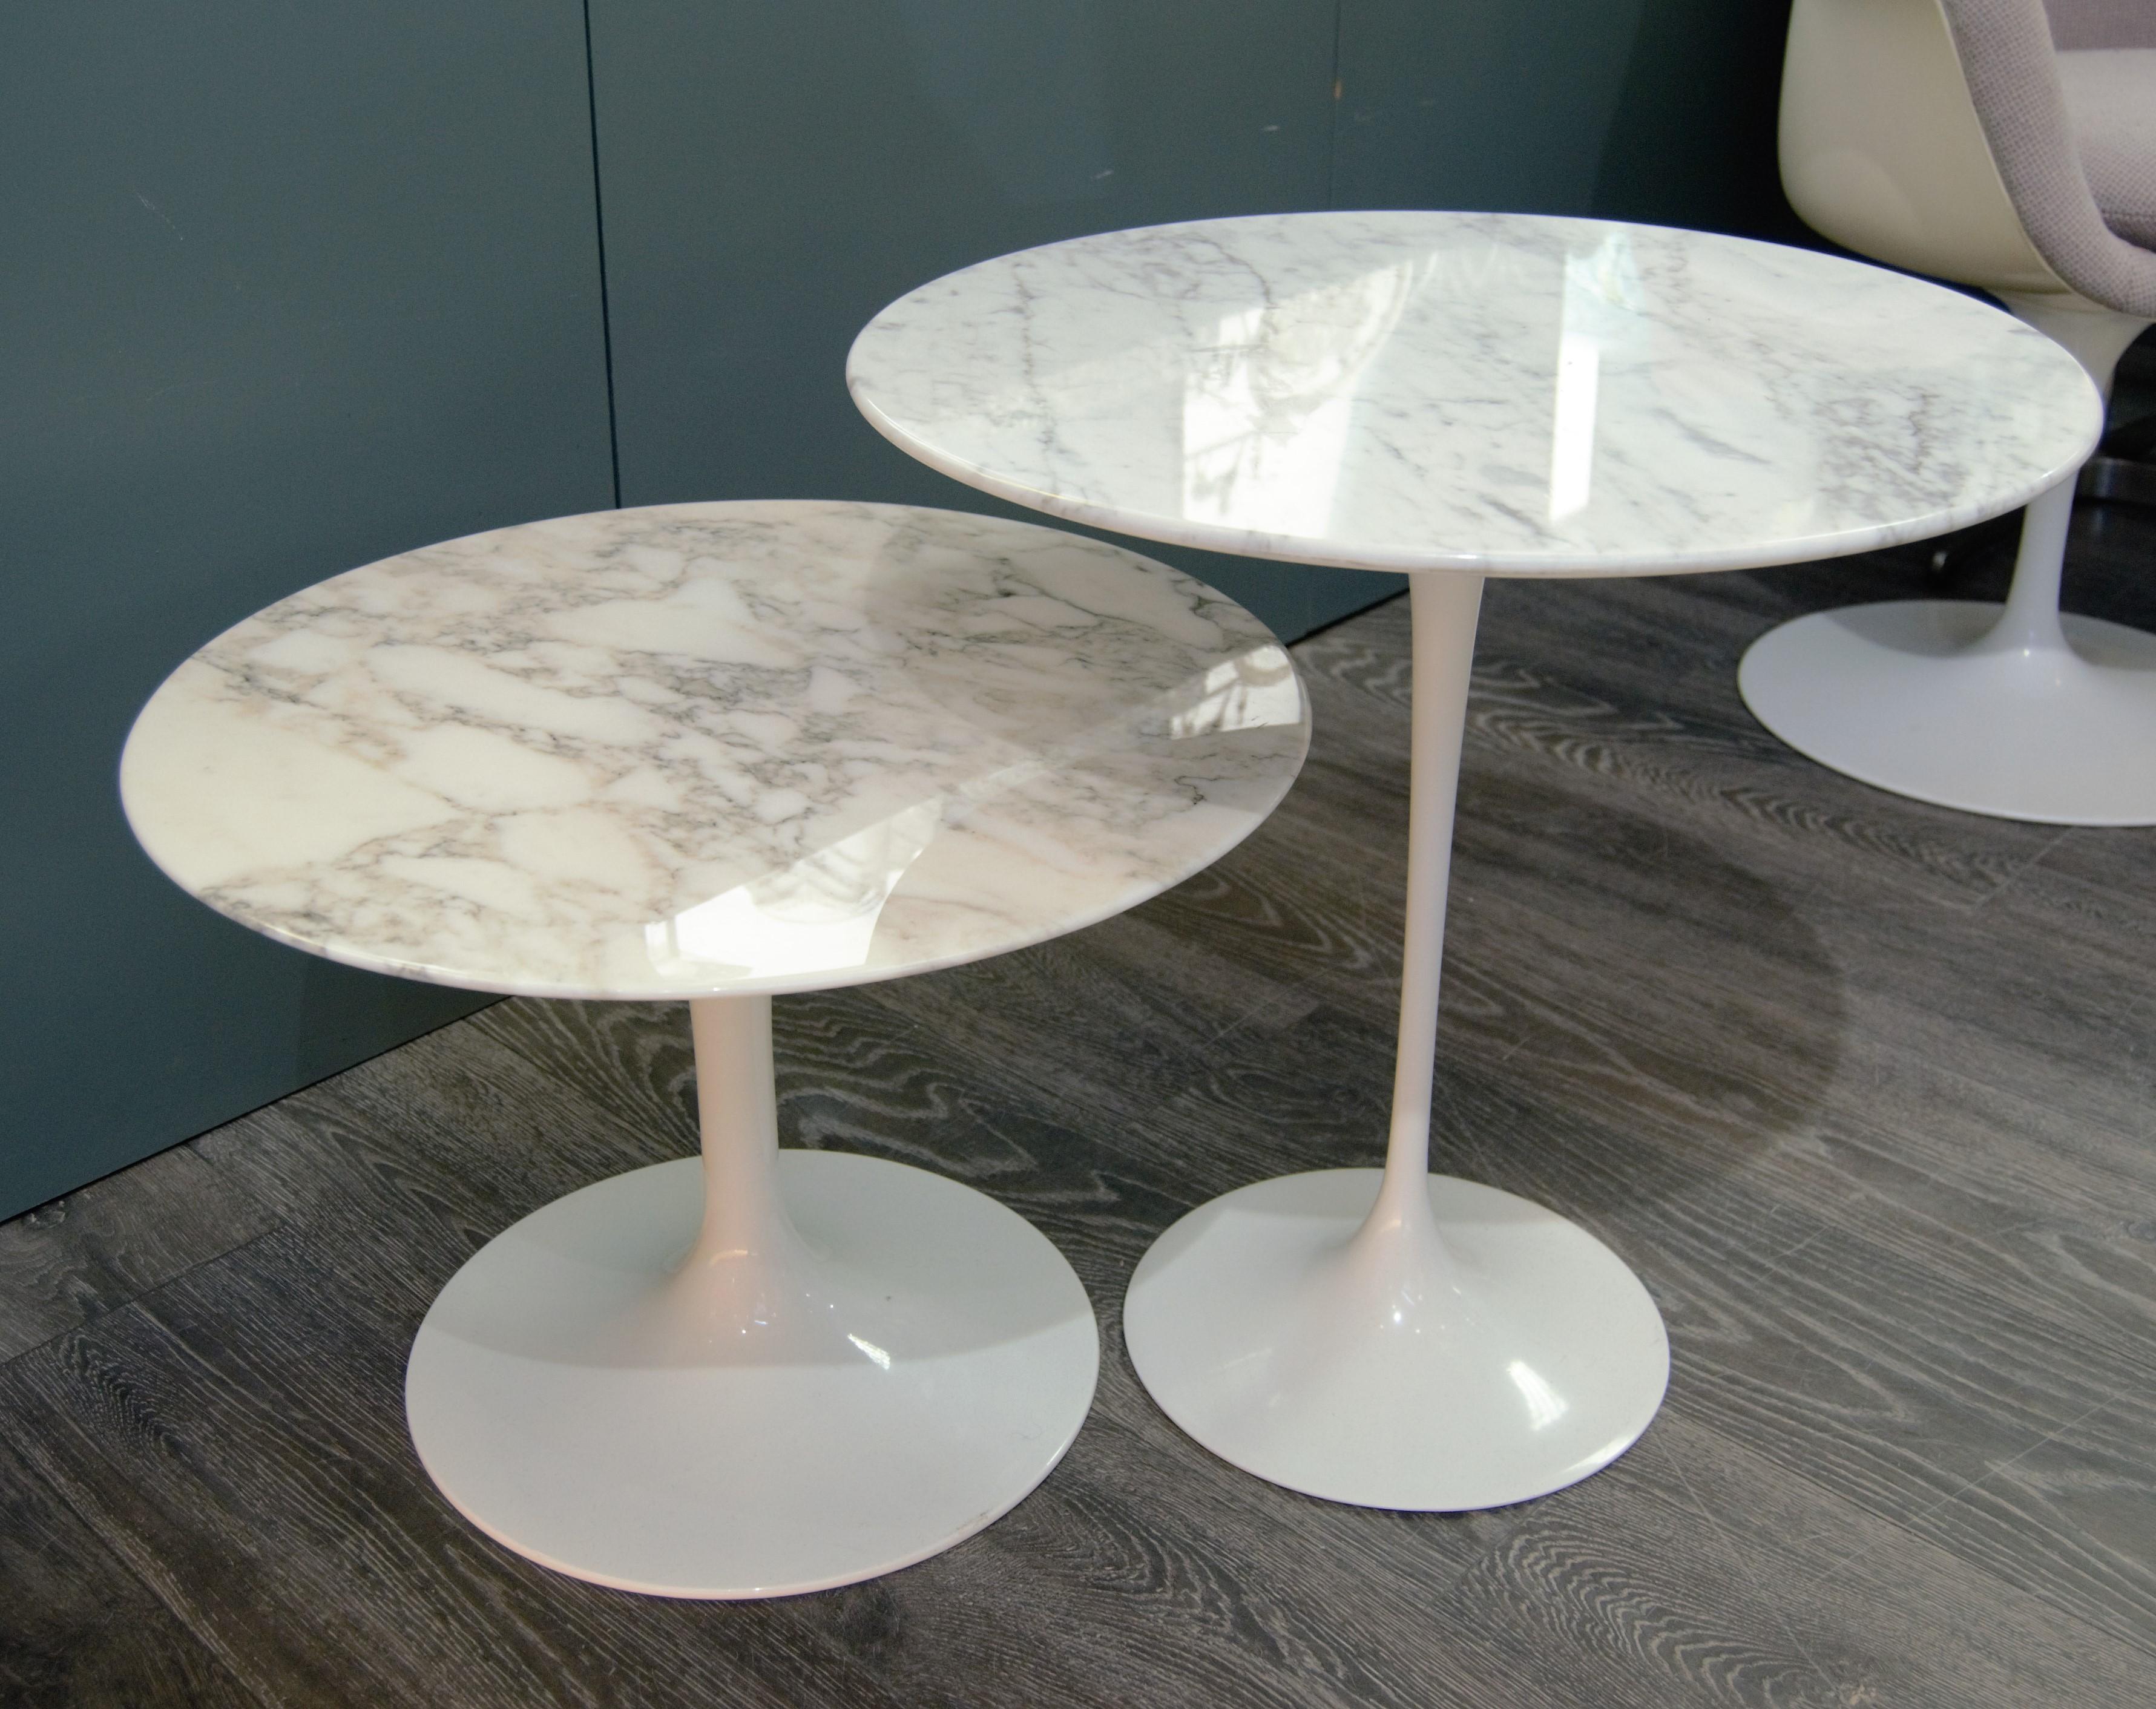 Eero Saarinen (1910-1961) & Knoll International
Tulip, modèle created, 1956.
Eero Saarinen (1910-1961) & Knoll International 

2 pedestals forming nesting tables with round marble tops on a tulip foot. 
Measures: 20.08 x 20.08 inch.
14.18 x